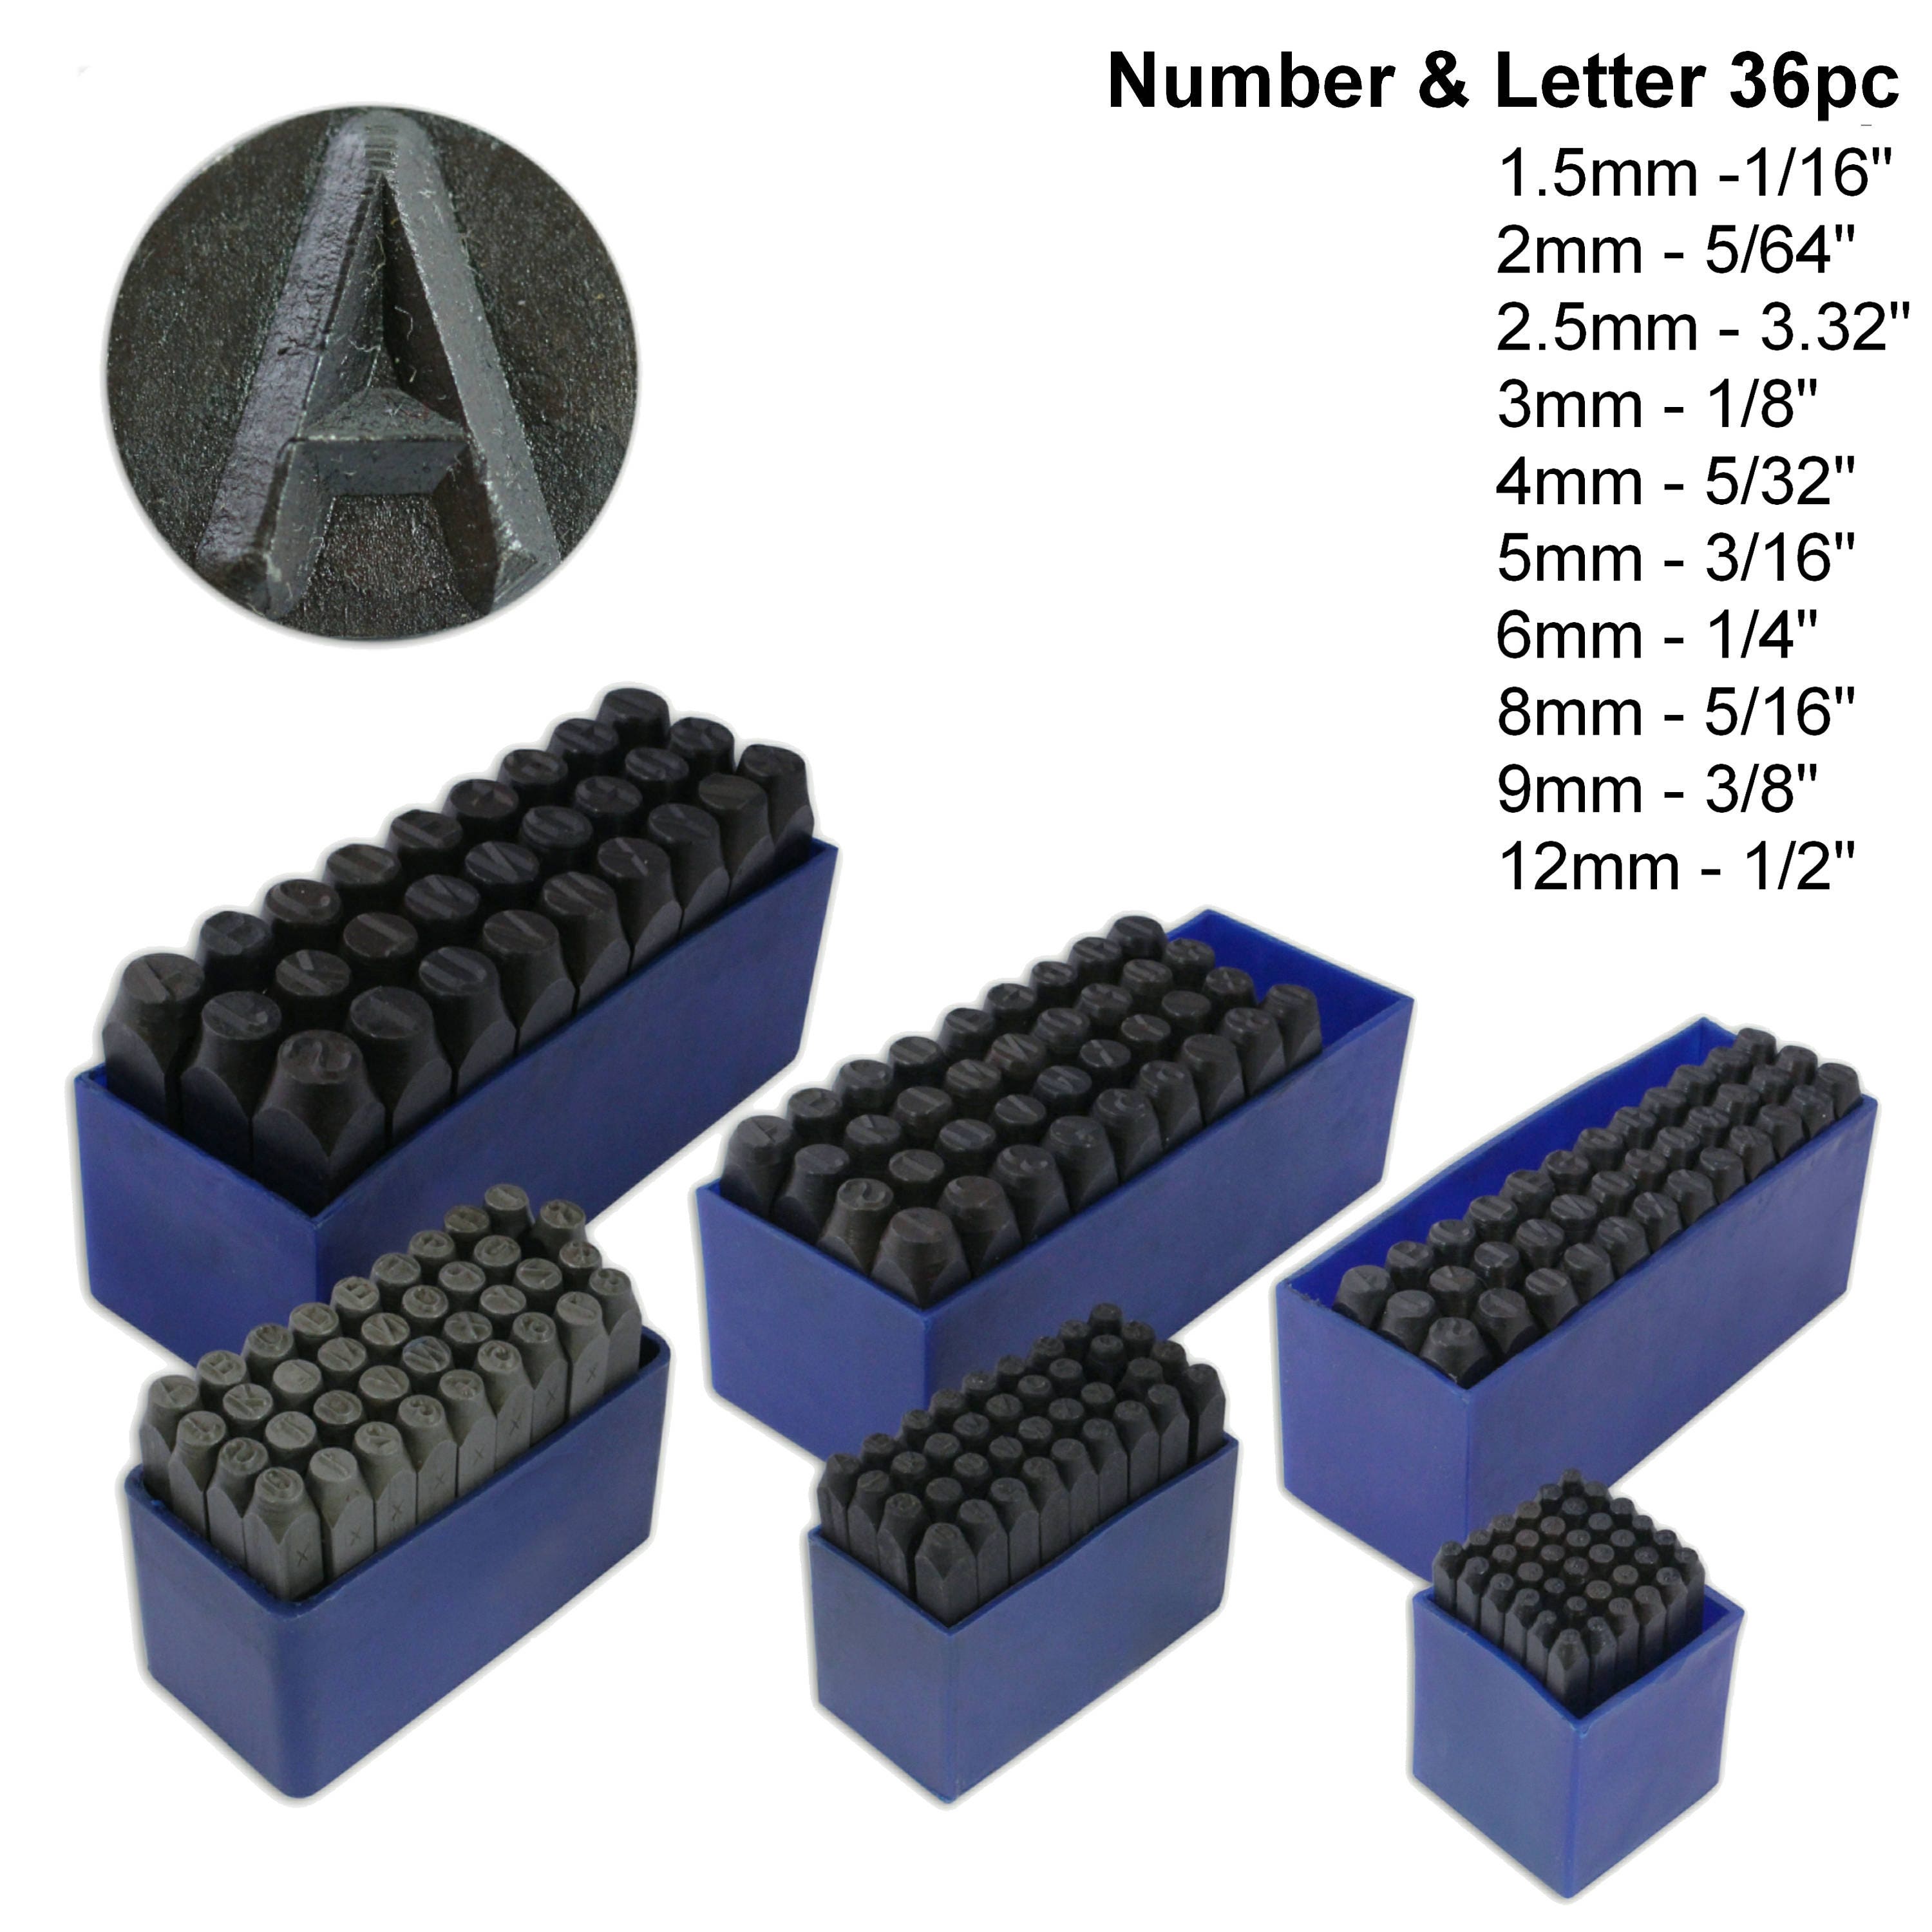 Number & Letter Stamps 10mm 3/8" 36 PC Letter and Number Stamp 